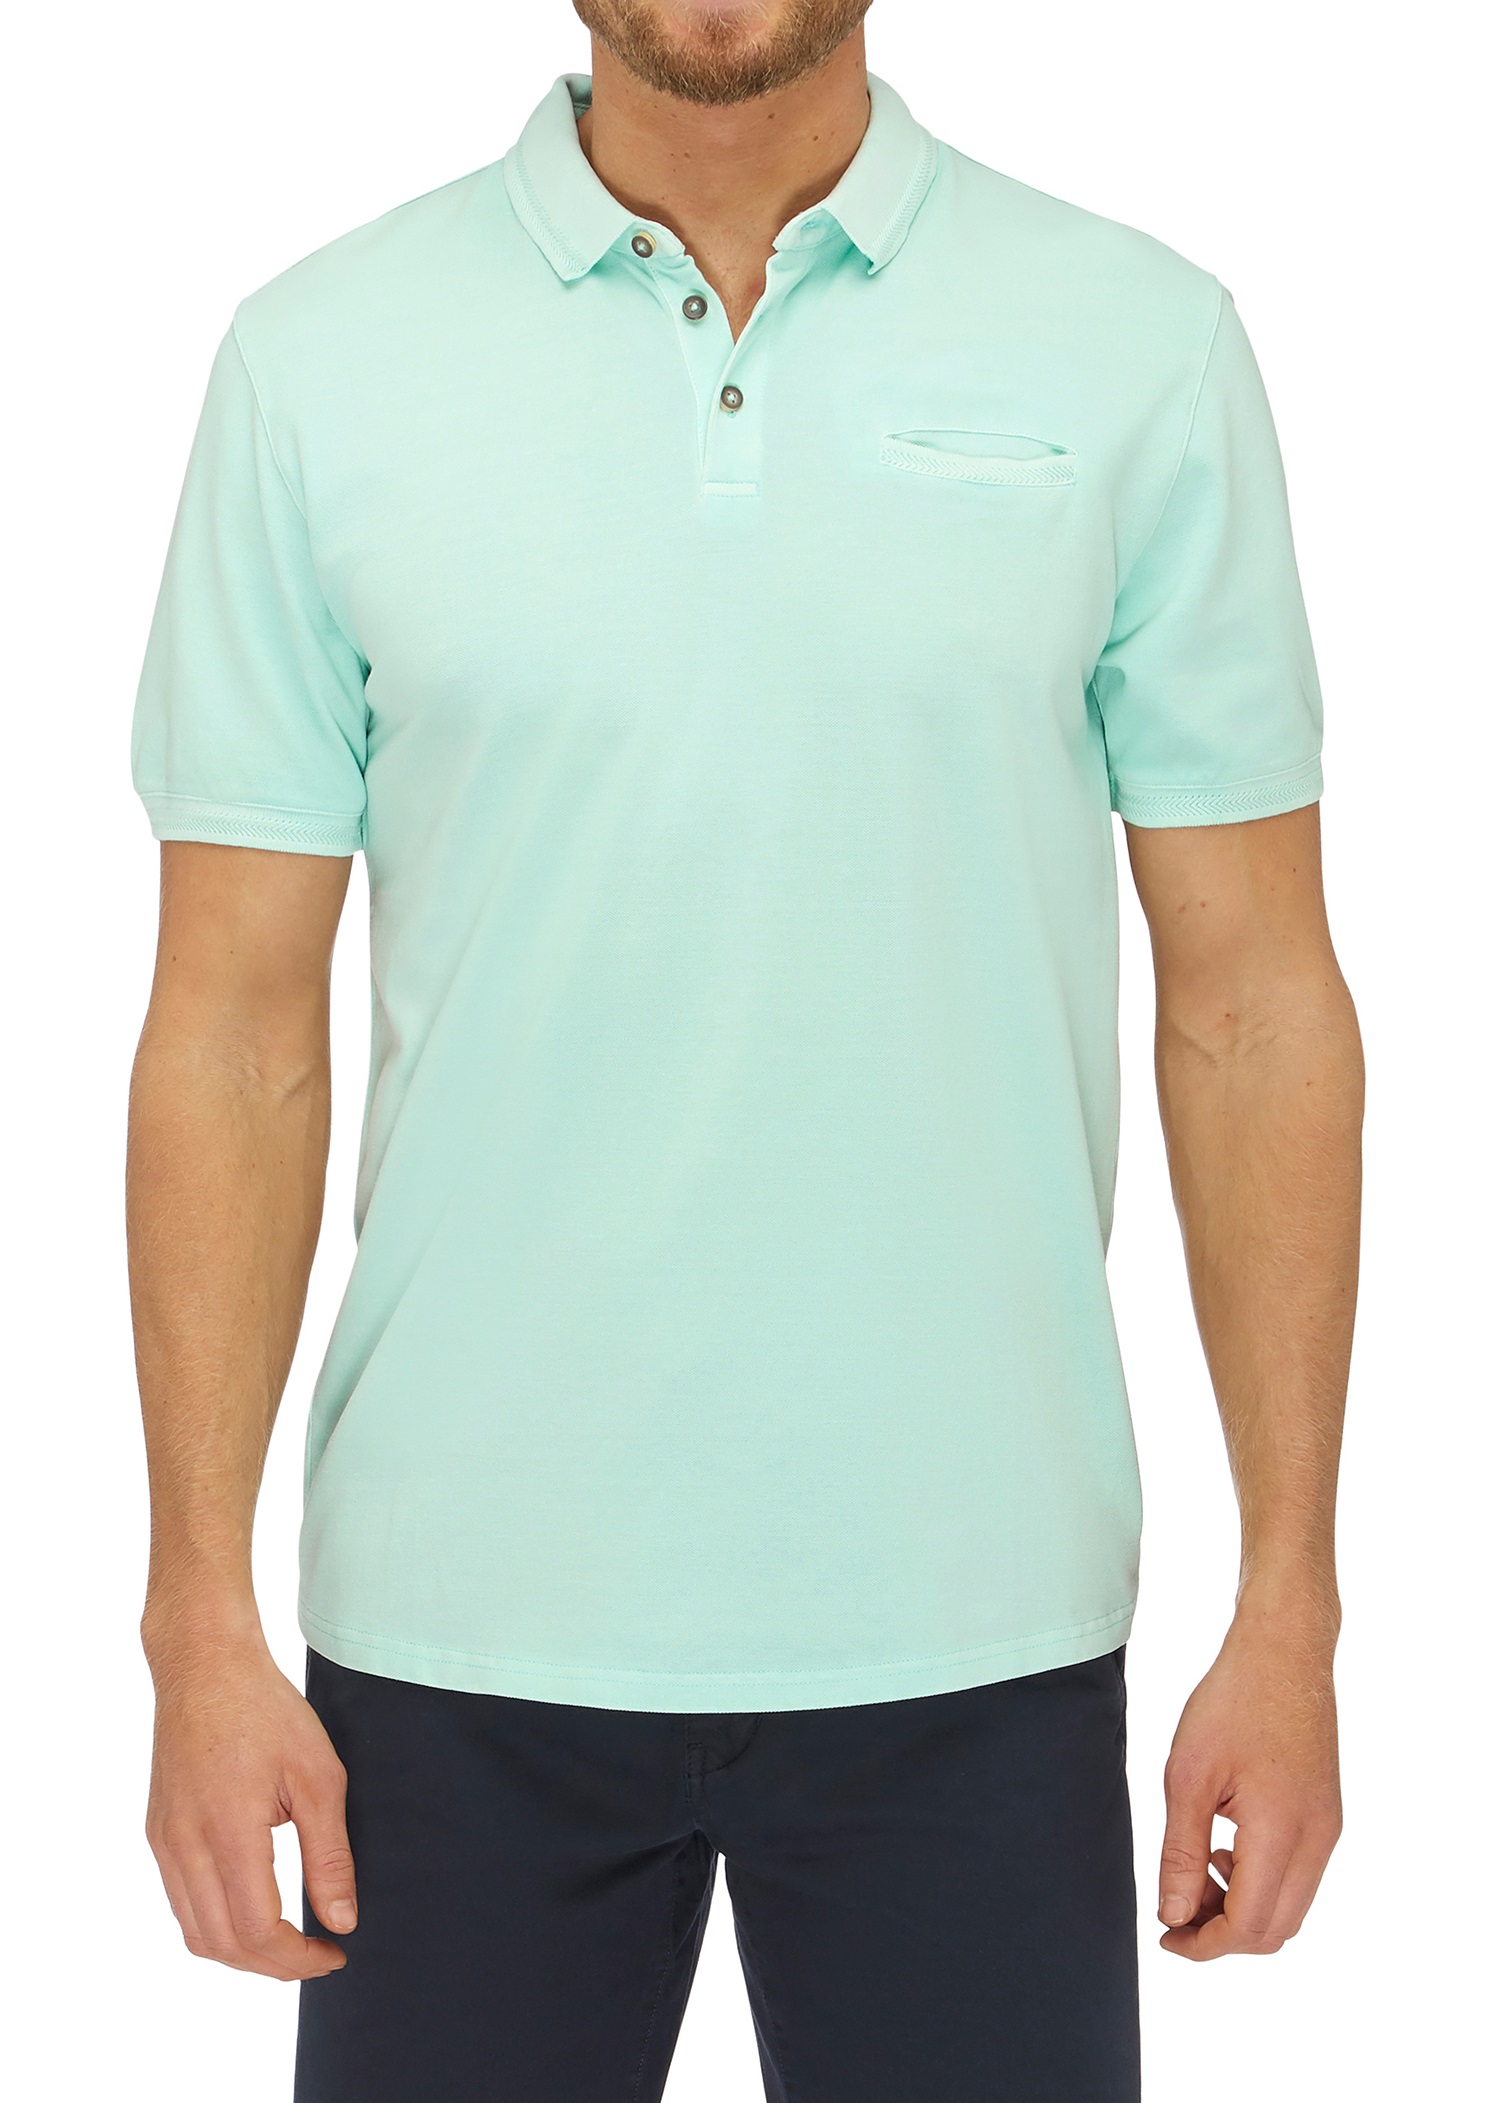 City Club Mens Polo Garment Dyed Pique Stretch Polo Buy Online